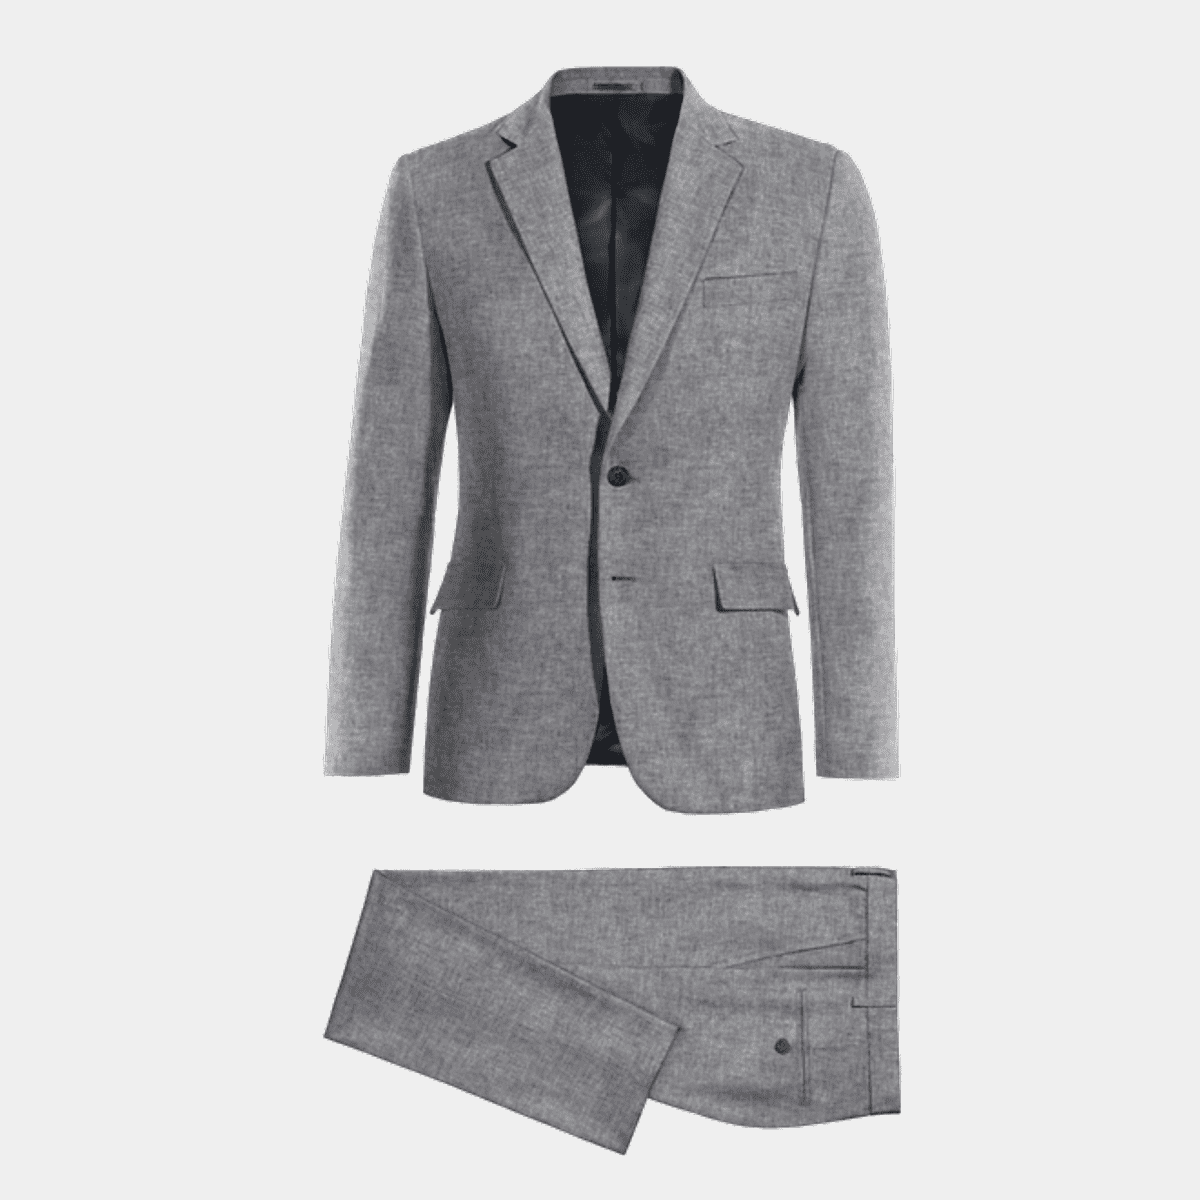 New Suits Arrivals | Hockerty